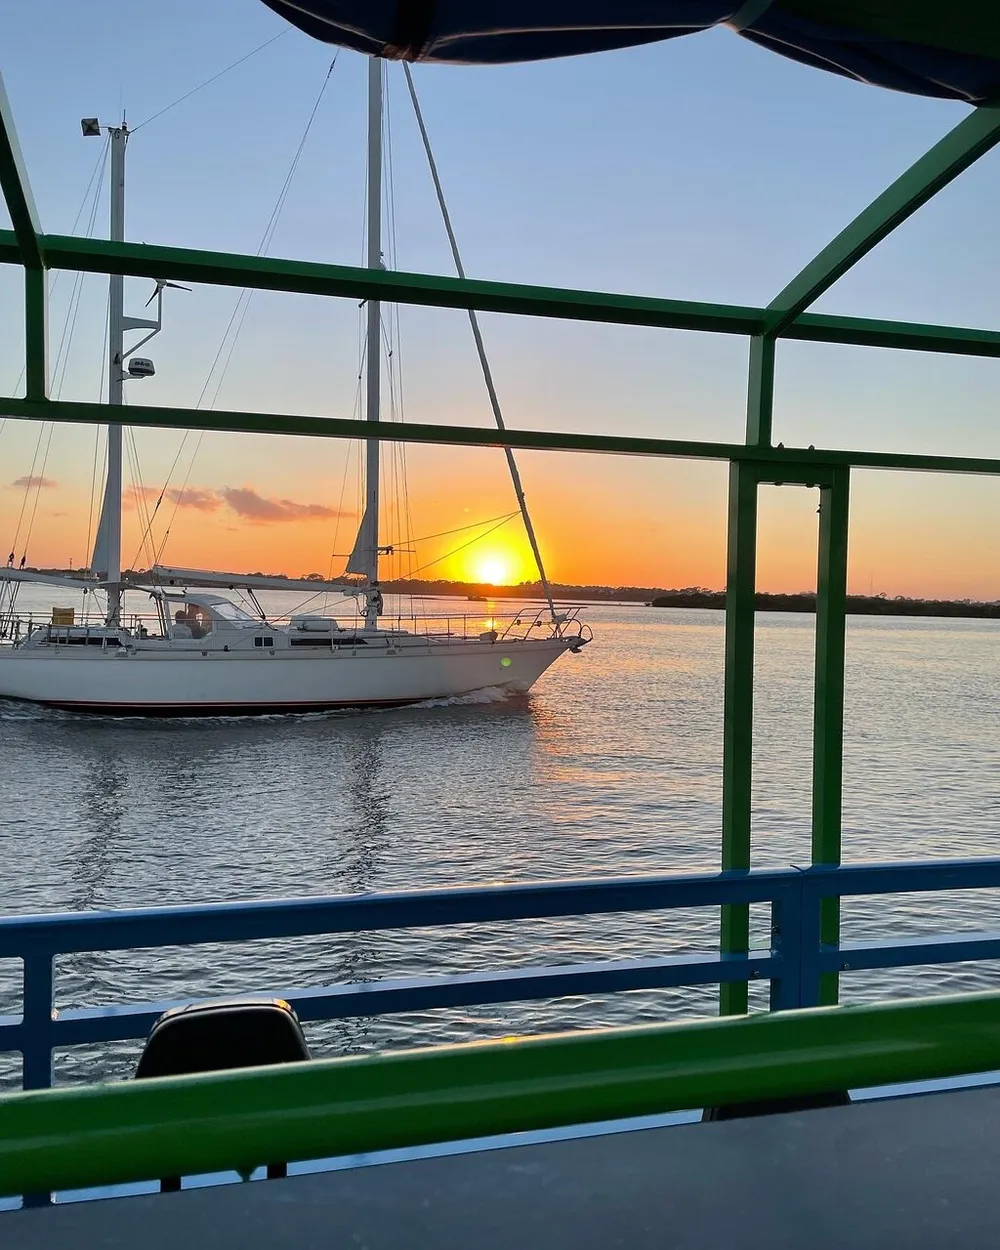 A serene sunset with the sun descending behind a sailboat viewed through the vibrant green structure of a waterfront railing